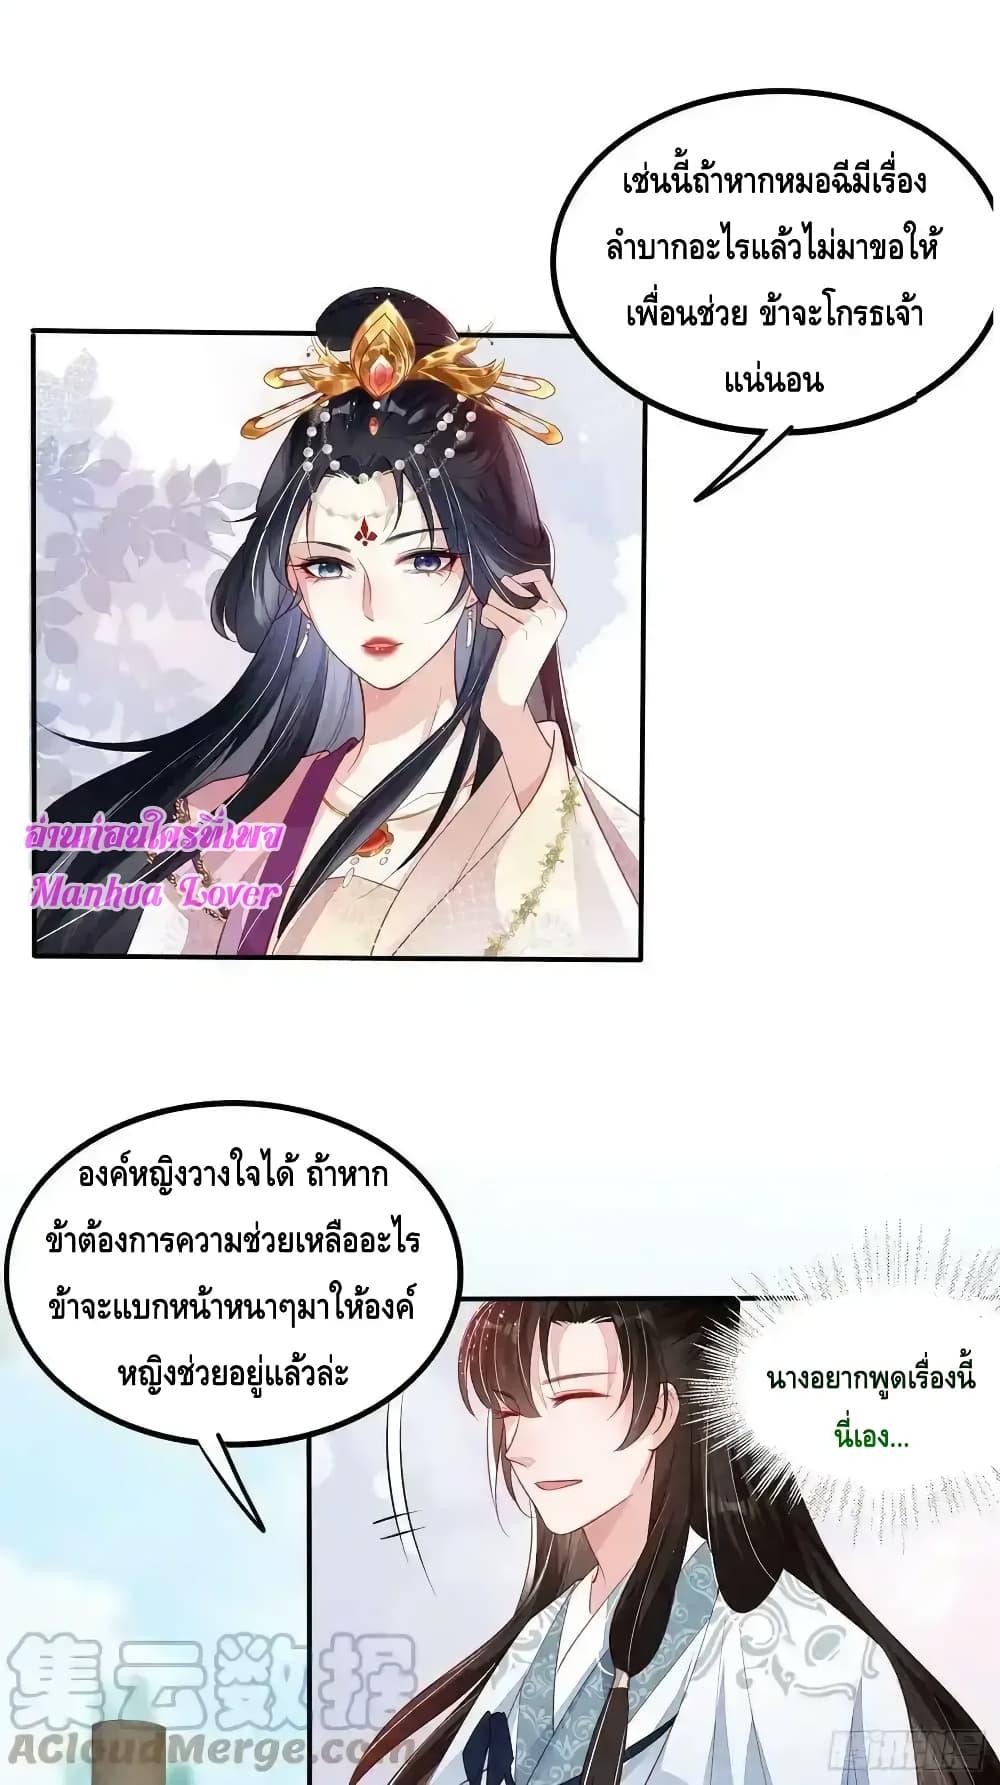 After I Bloom, a Hundred Flowers Will ill – ดอกไม้นับ ตอนที่ 70 (23)